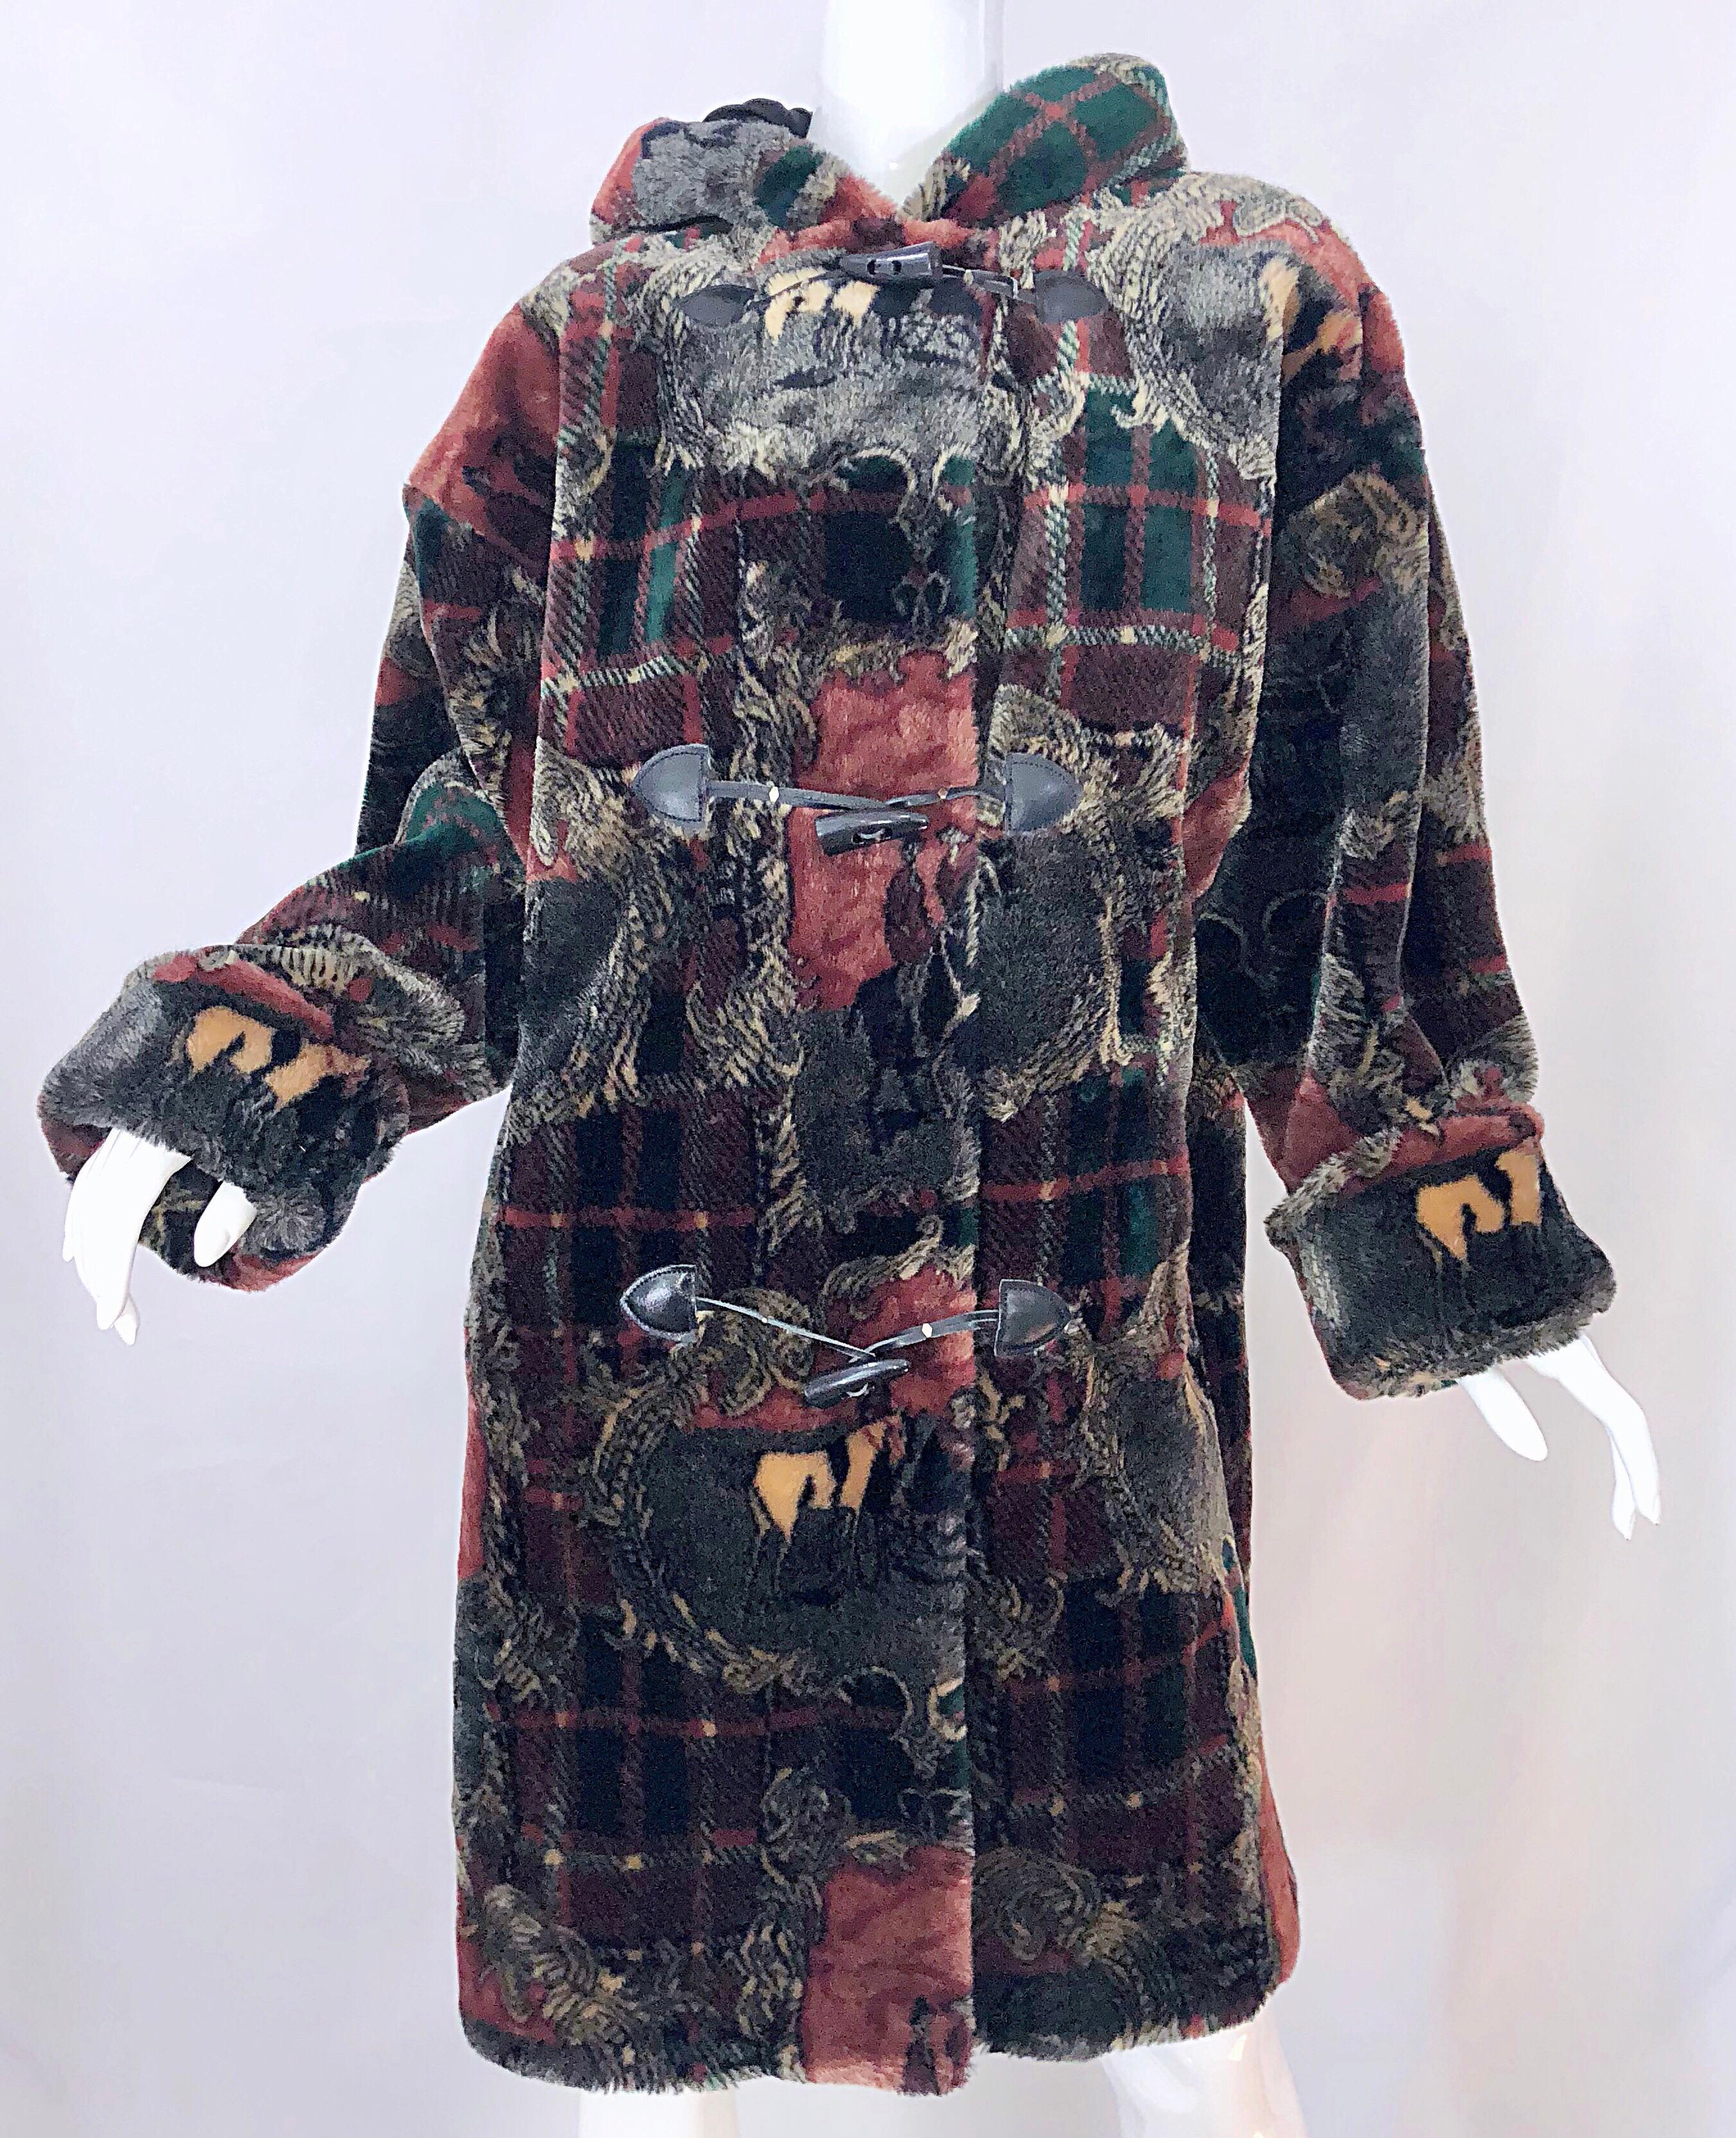 Extra Plush Vintage Faux Fur Equestrian Plaid Print Oversized Hooded Jacket For Sale 3